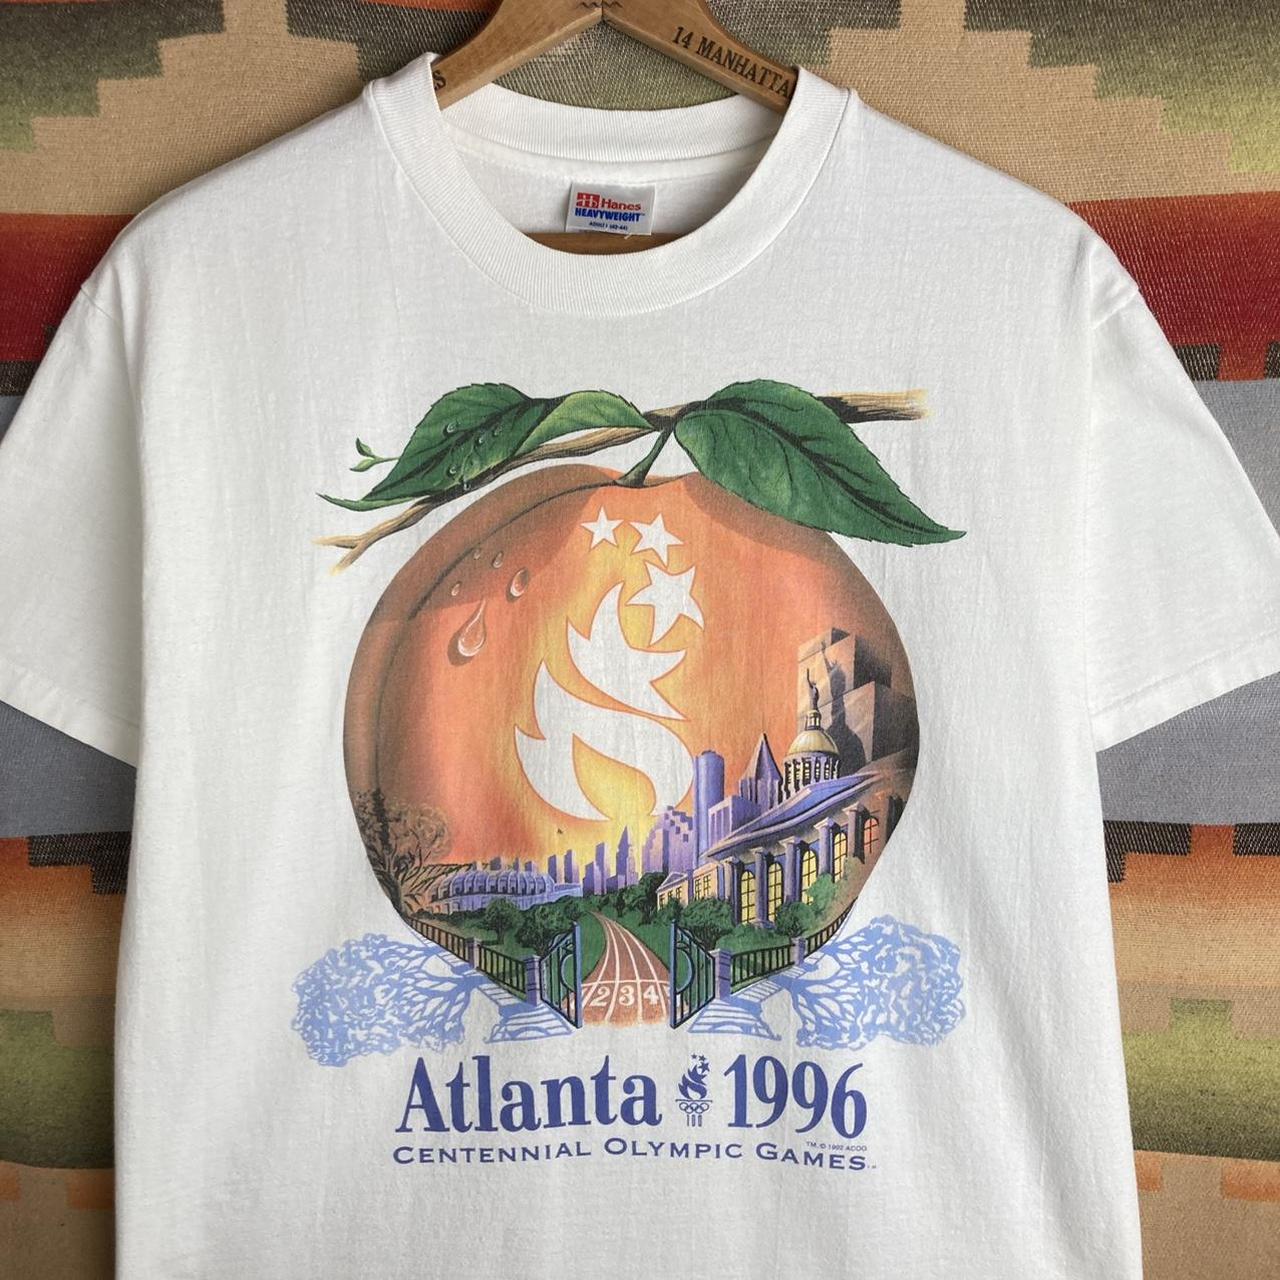 item listed by molfvintage